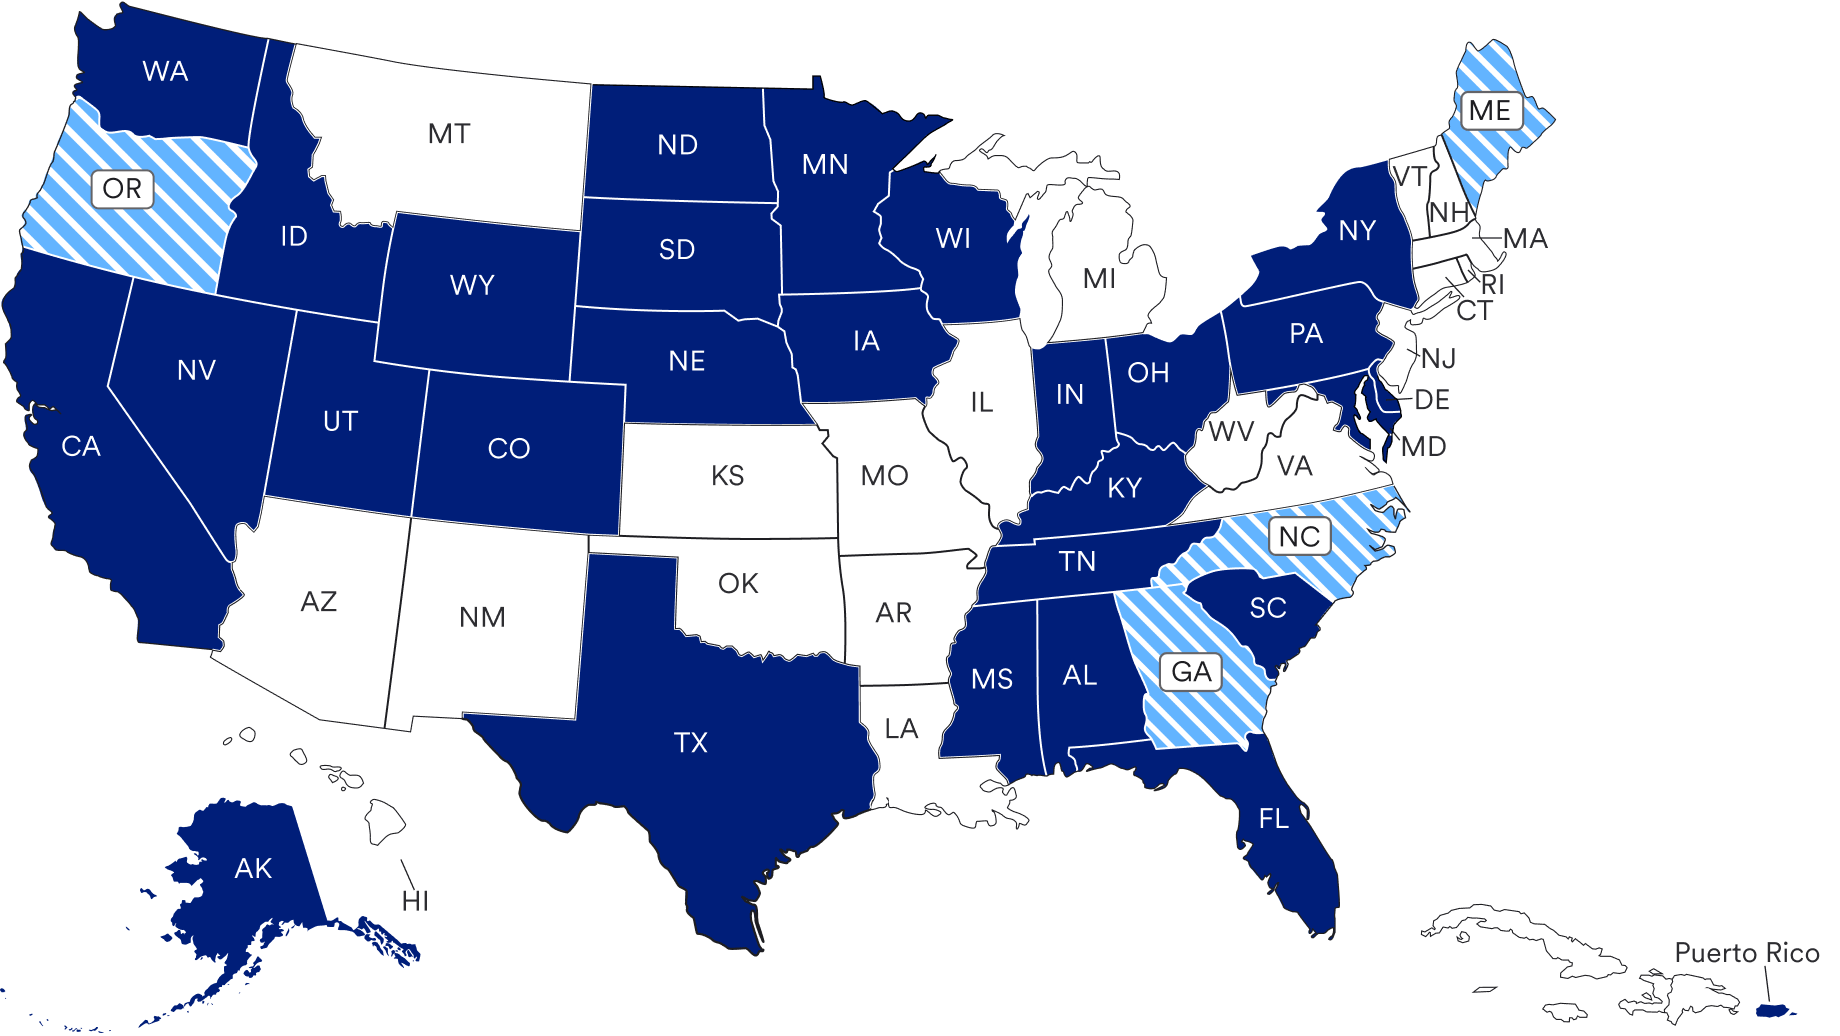 A map of the United States highlighting the states where U.S. Bank is approved by the departments of insurance in each state.